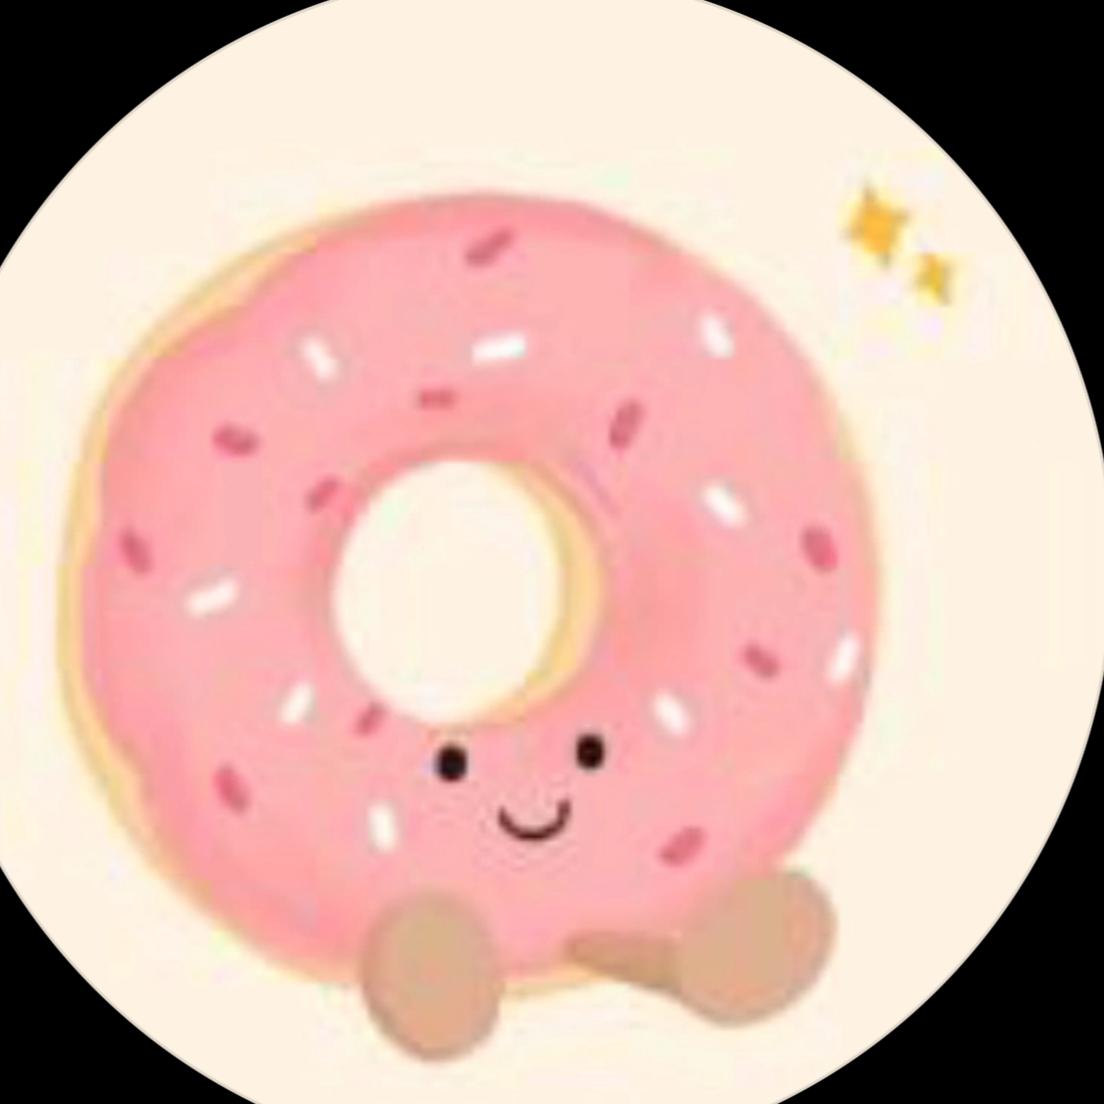 🍩's images